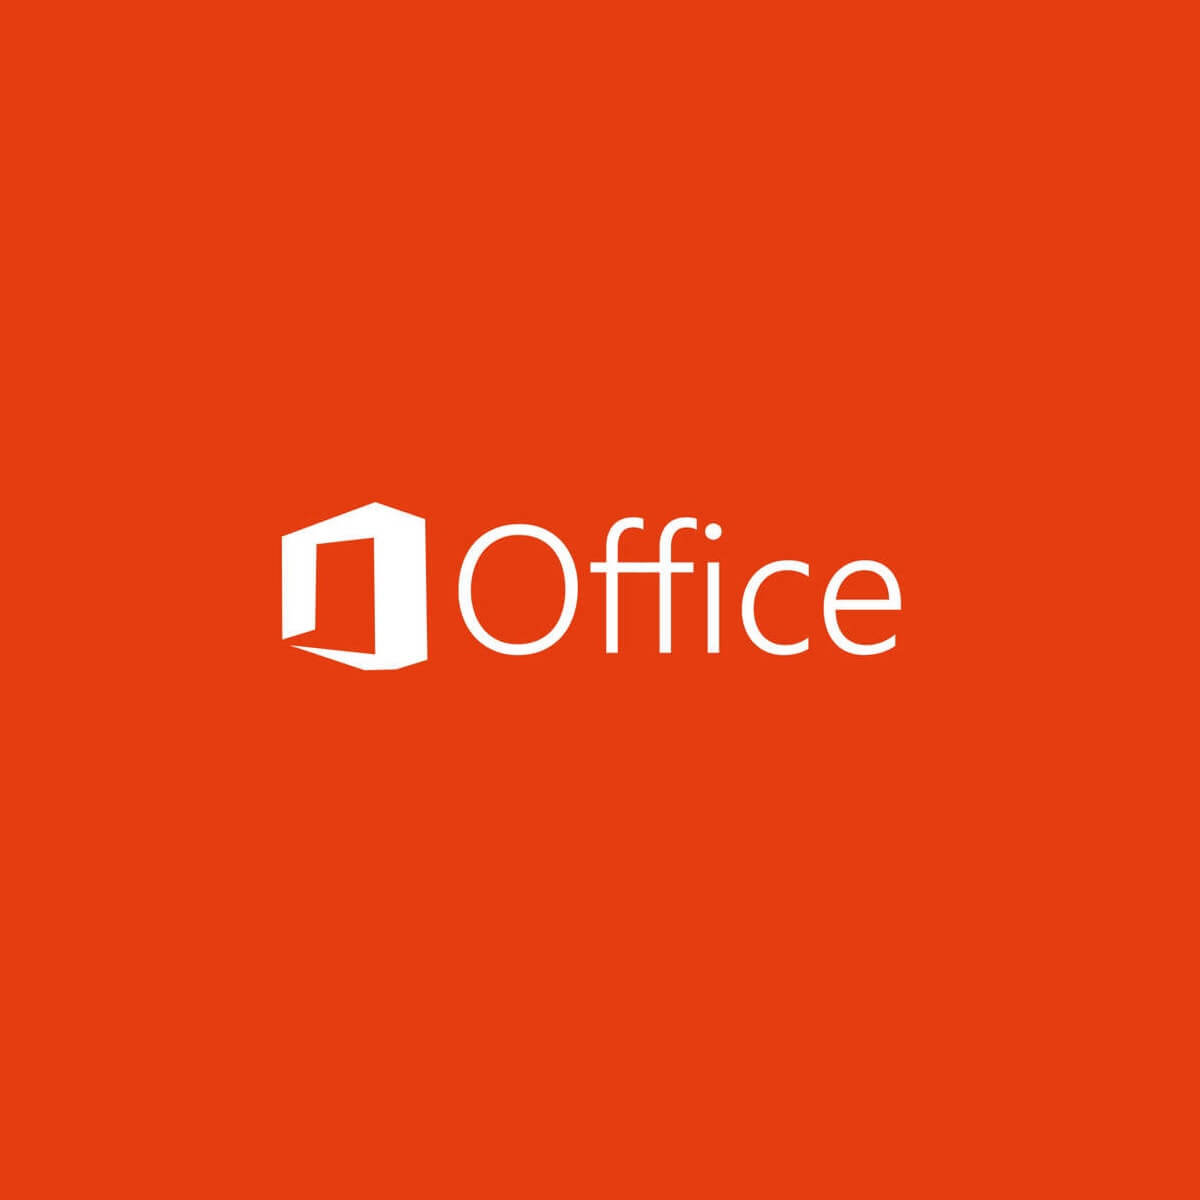 New Office Insider build brings a plethora of fixes